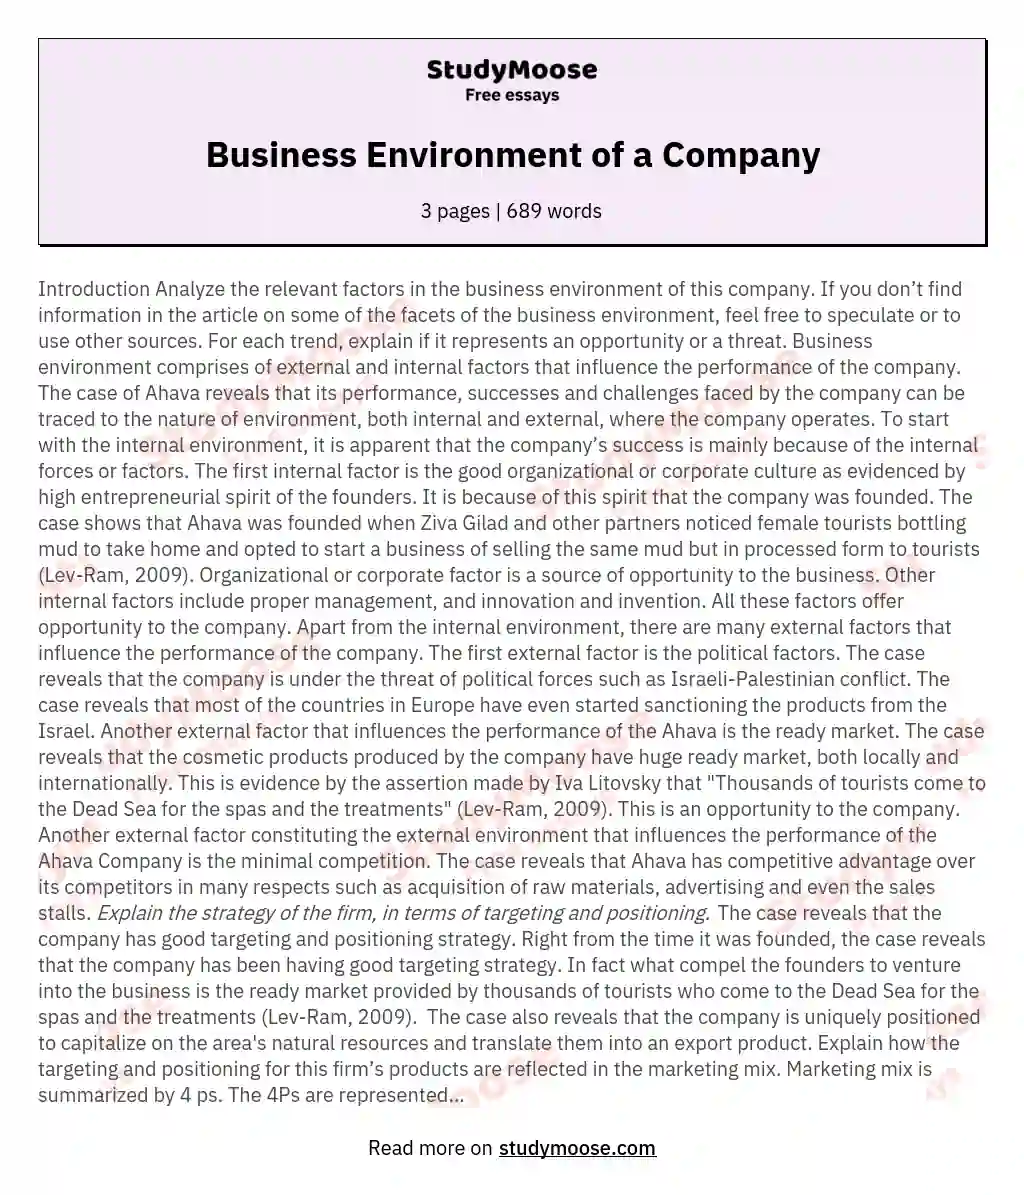 Business Environment of a Company essay